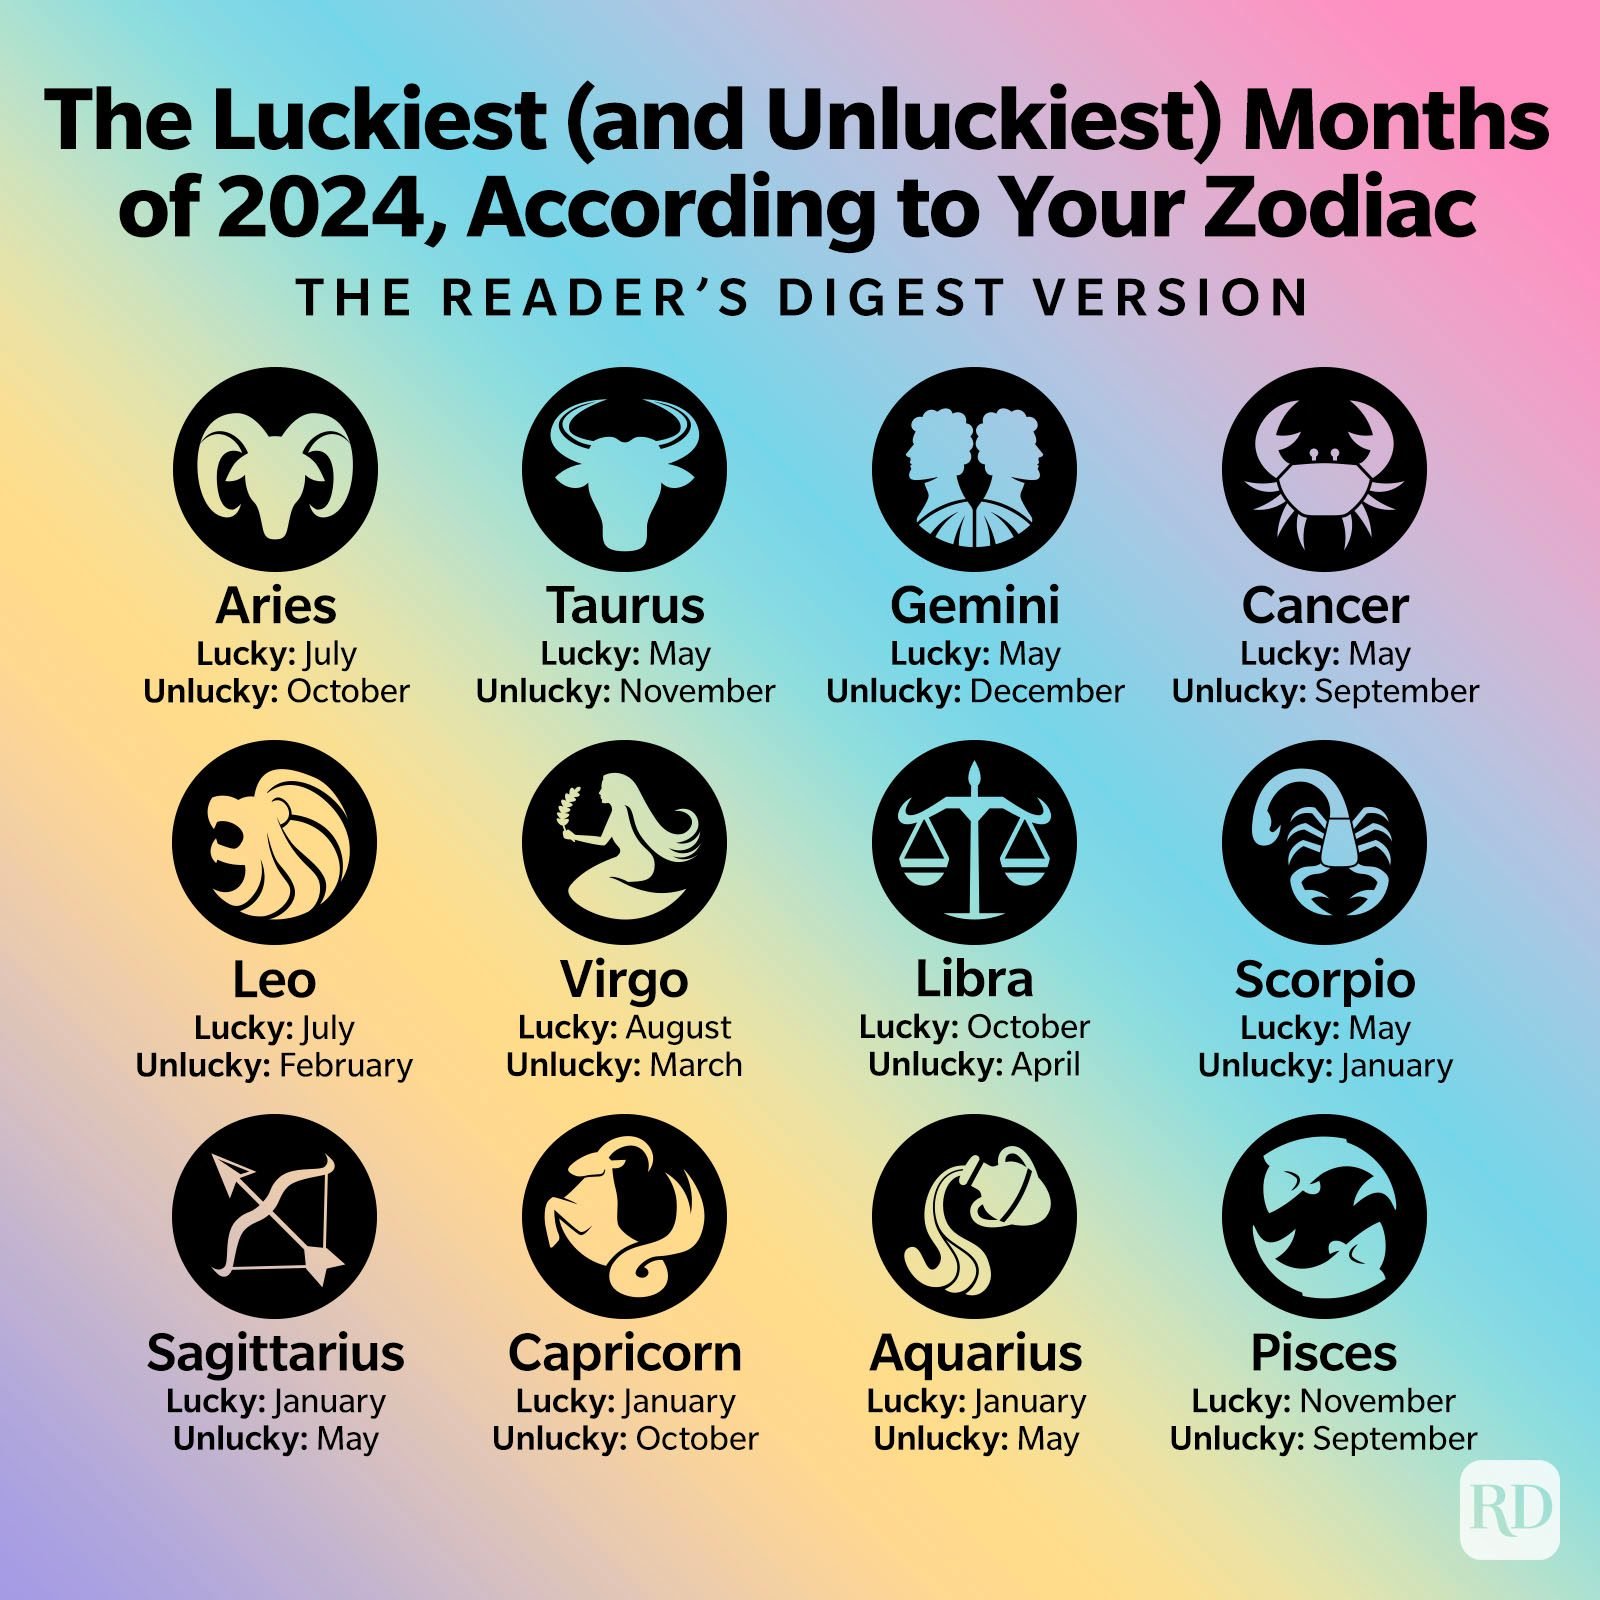 The Luckiest And Unluckiest Months Of 2024 According To Your Zodiac Sign Infographic GettyImages ?fit=700%2C700